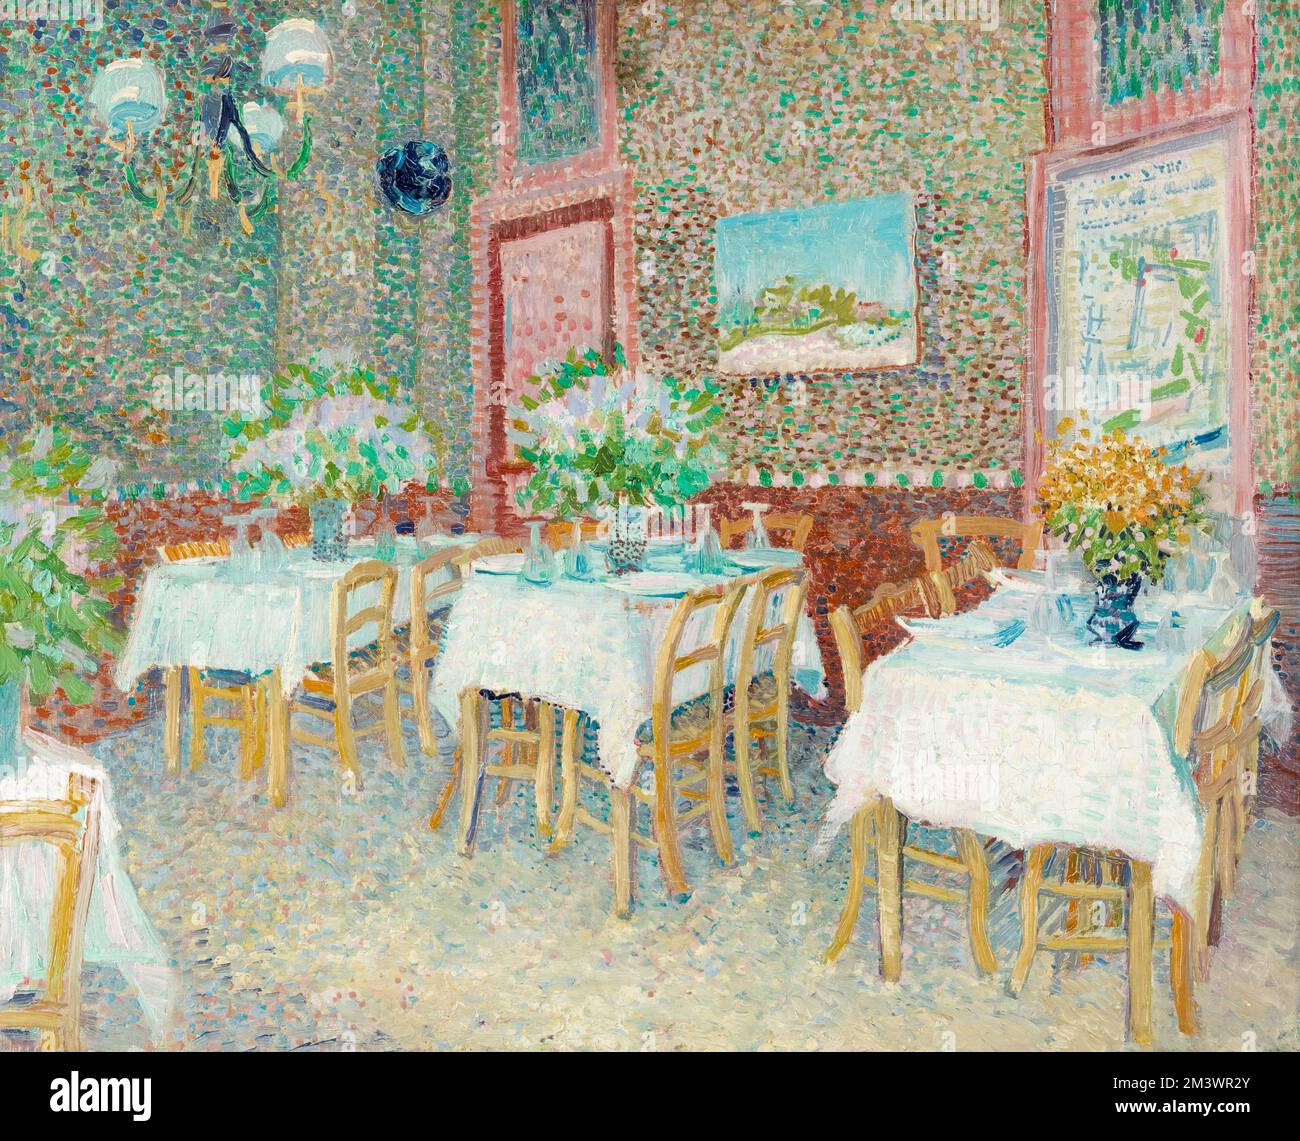 Vincent van Gogh, Interior of a Restaurant, painting in oil on canvas, 1887 Stock Photo